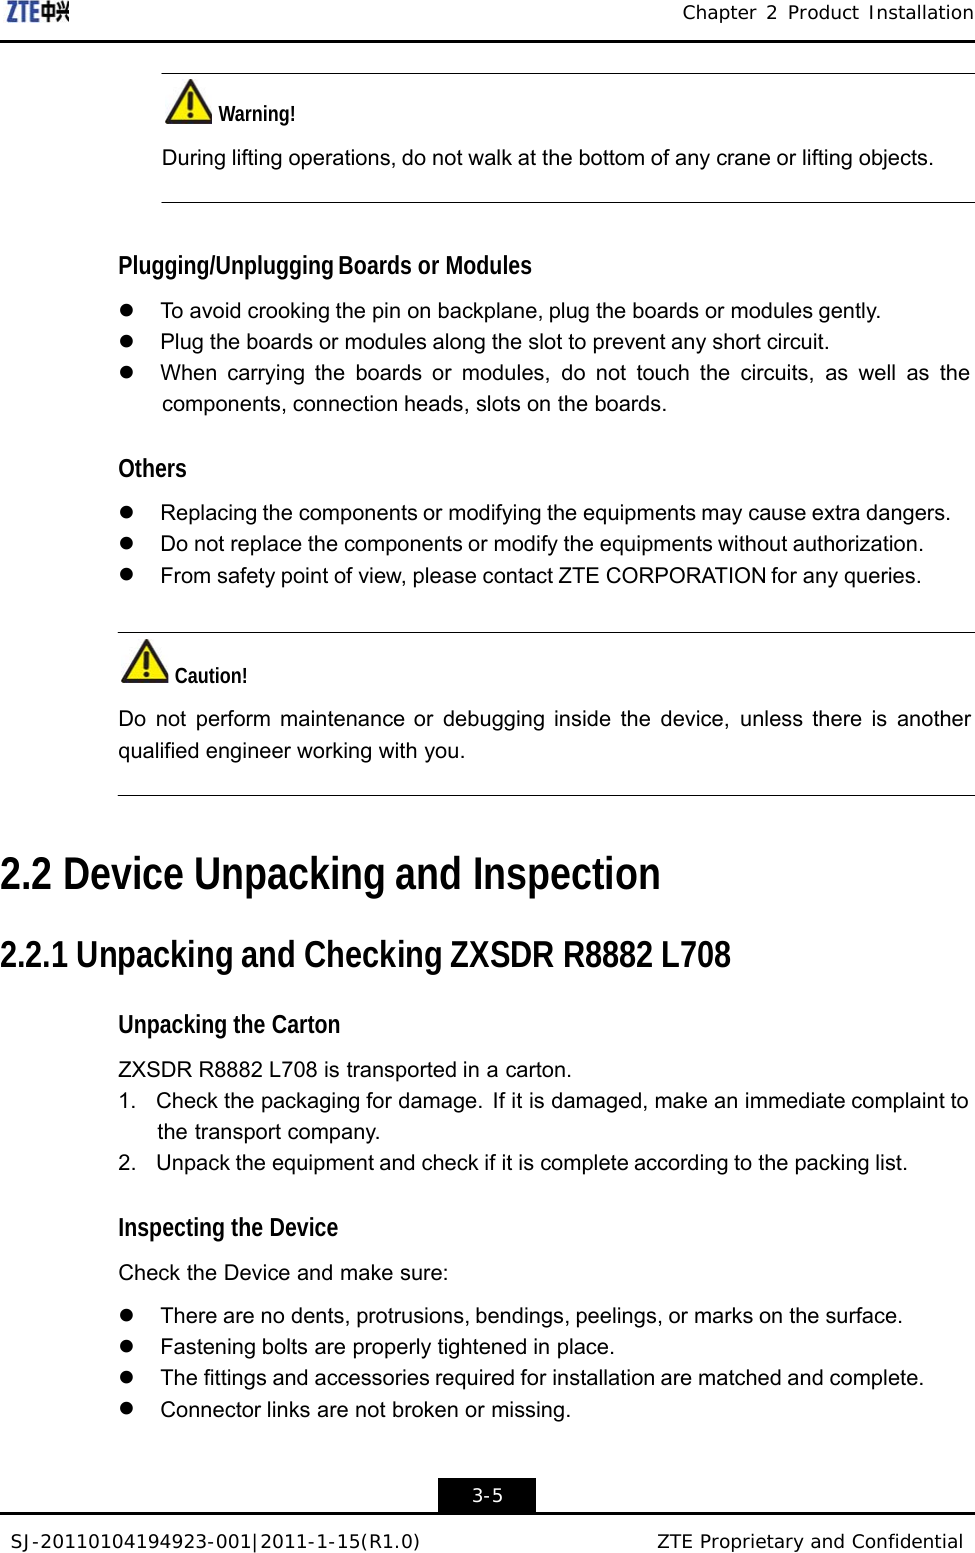 SJ-20110104194923-001|2011-1-15(R1.0) ZTE Proprietary and Confidential Chapter 2 Product Installation      Warning!  During lifting operations, do not walk at the bottom of any crane or lifting objects.     Plugging/Unplugging Boards or Modules  z  To avoid crooking the pin on backplane, plug the boards or modules gently. z  Plug the boards or modules along the slot to prevent any short circuit. z  When carrying the boards or modules, do not touch the circuits, as well as the components, connection heads, slots on the boards.  Others  z Replacing the components or modifying the equipments may cause extra dangers. z  Do not replace the components or modify the equipments without authorization. z From safety point of view, please contact ZTE CORPORATION for any queries.    Caution!  Do not perform maintenance or debugging inside the device, unless there is another qualified engineer working with you.     2.2 Device Unpacking and Inspection   2.2.1 Unpacking and Checking ZXSDR R8882 L708   Unpacking the Carton  ZXSDR R8882 L708 is transported in a carton. 1.  Check the packaging for damage.  If it is damaged, make an immediate complaint to the transport company. 2.  Unpack the equipment and check if it is complete according to the packing list.   Inspecting the Device  Check the Device and make sure:  z  There are no dents, protrusions, bendings, peelings, or marks on the surface. z Fastening bolts are properly tightened in place. z  The fittings and accessories required for installation are matched and complete. z Connector links are not broken or missing.    3-5 